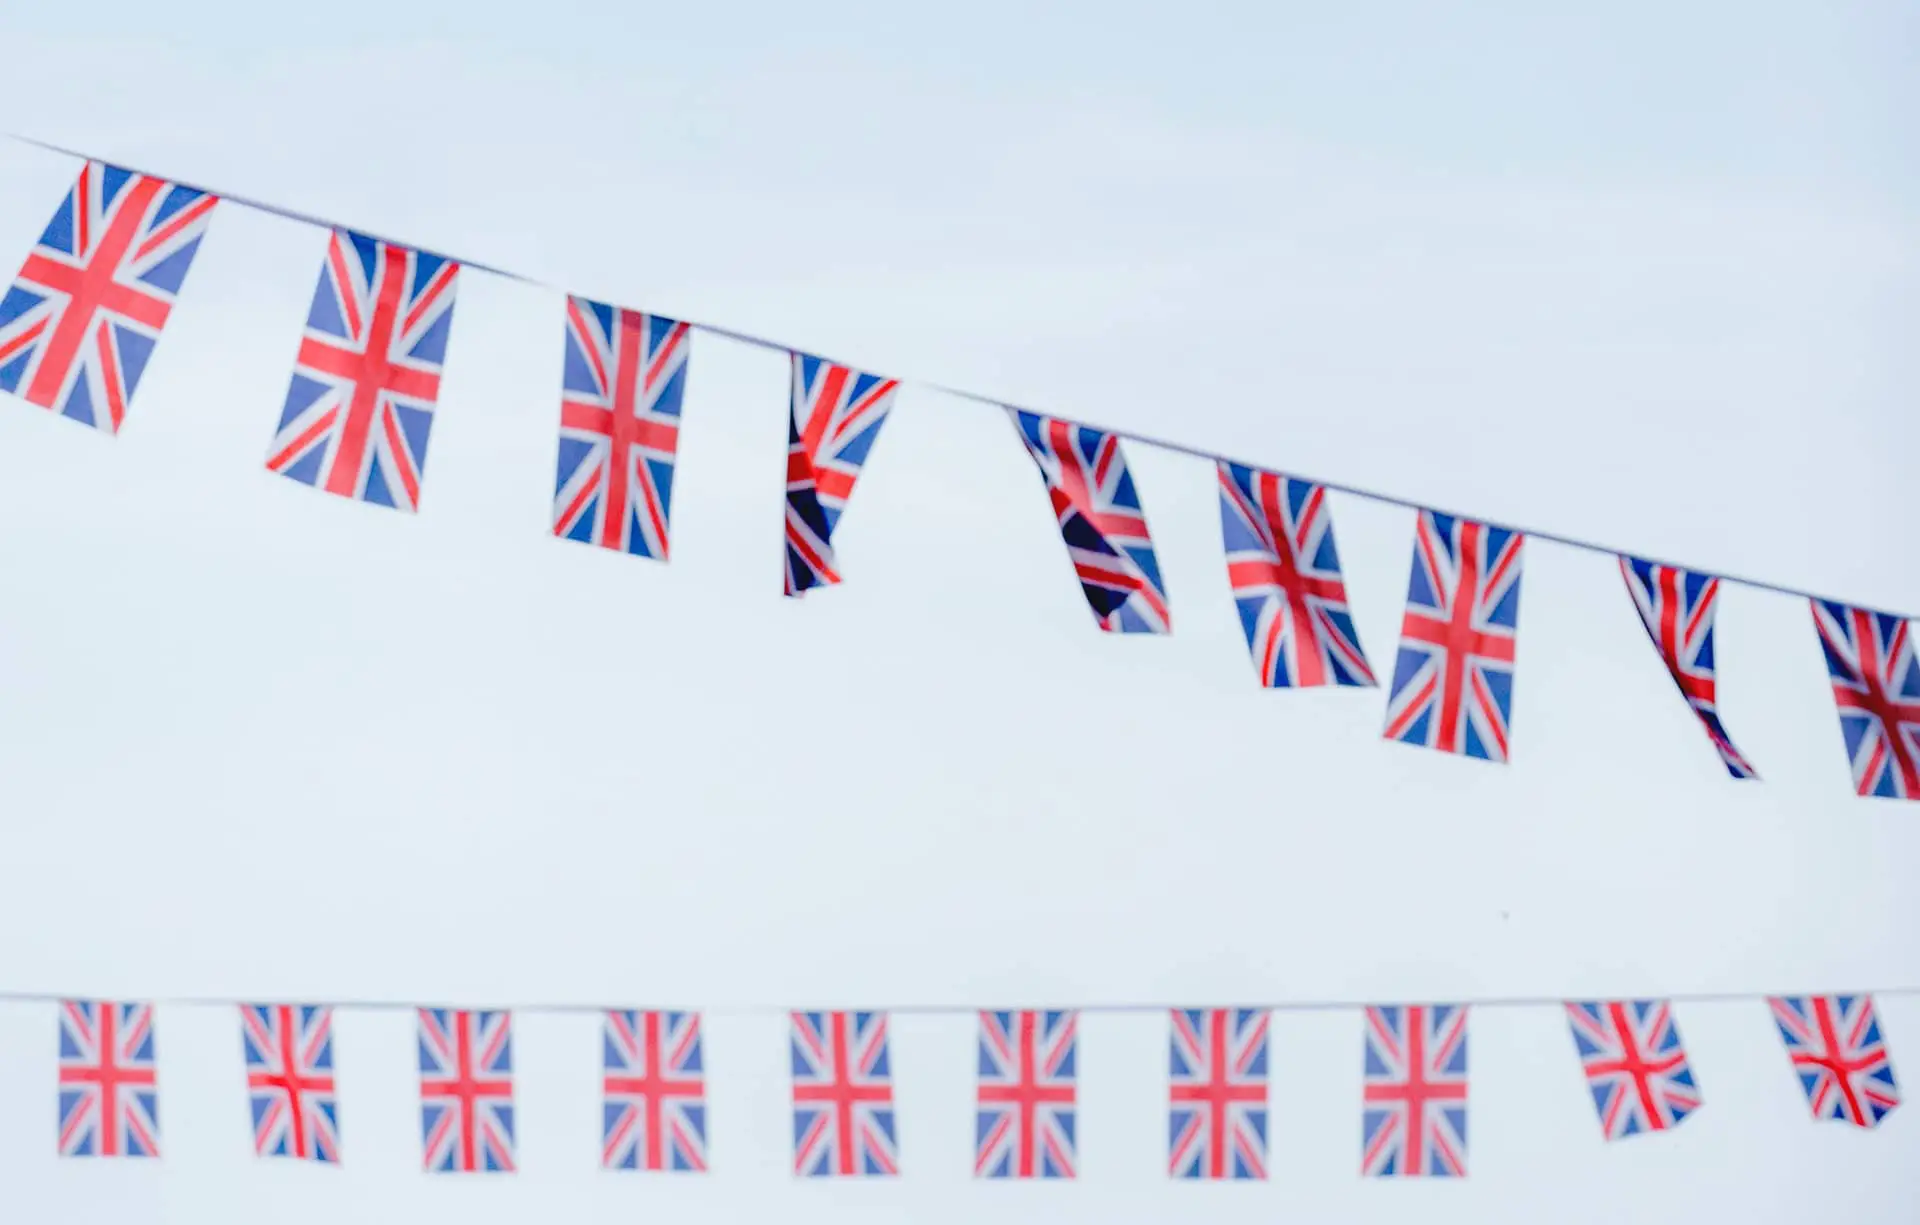 Union jack bunting hung up